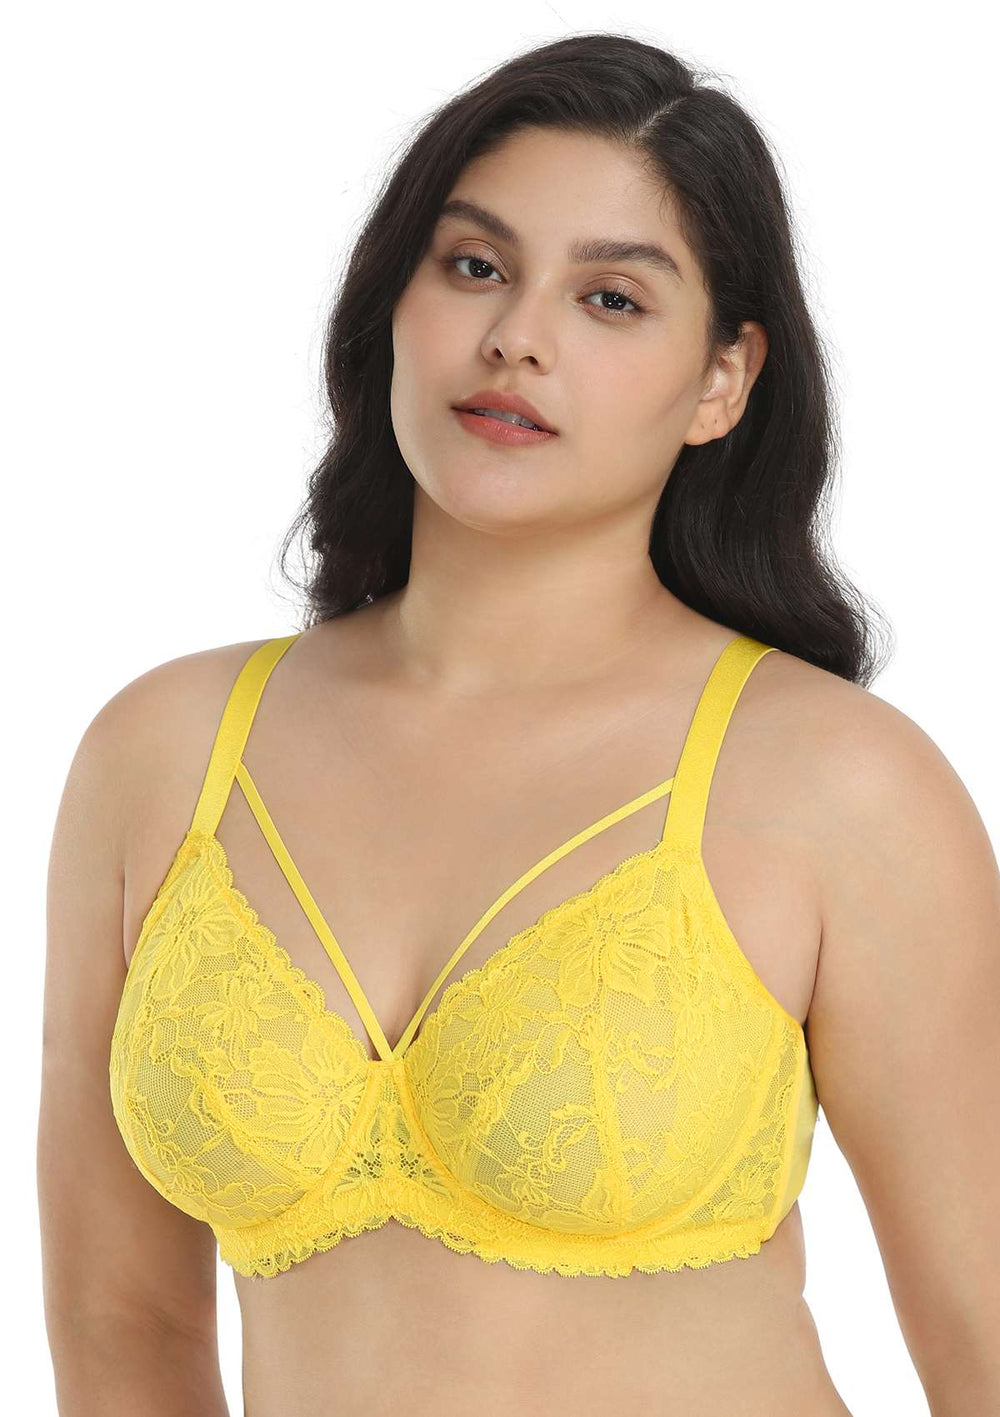 Which is the best bra company? - Quora